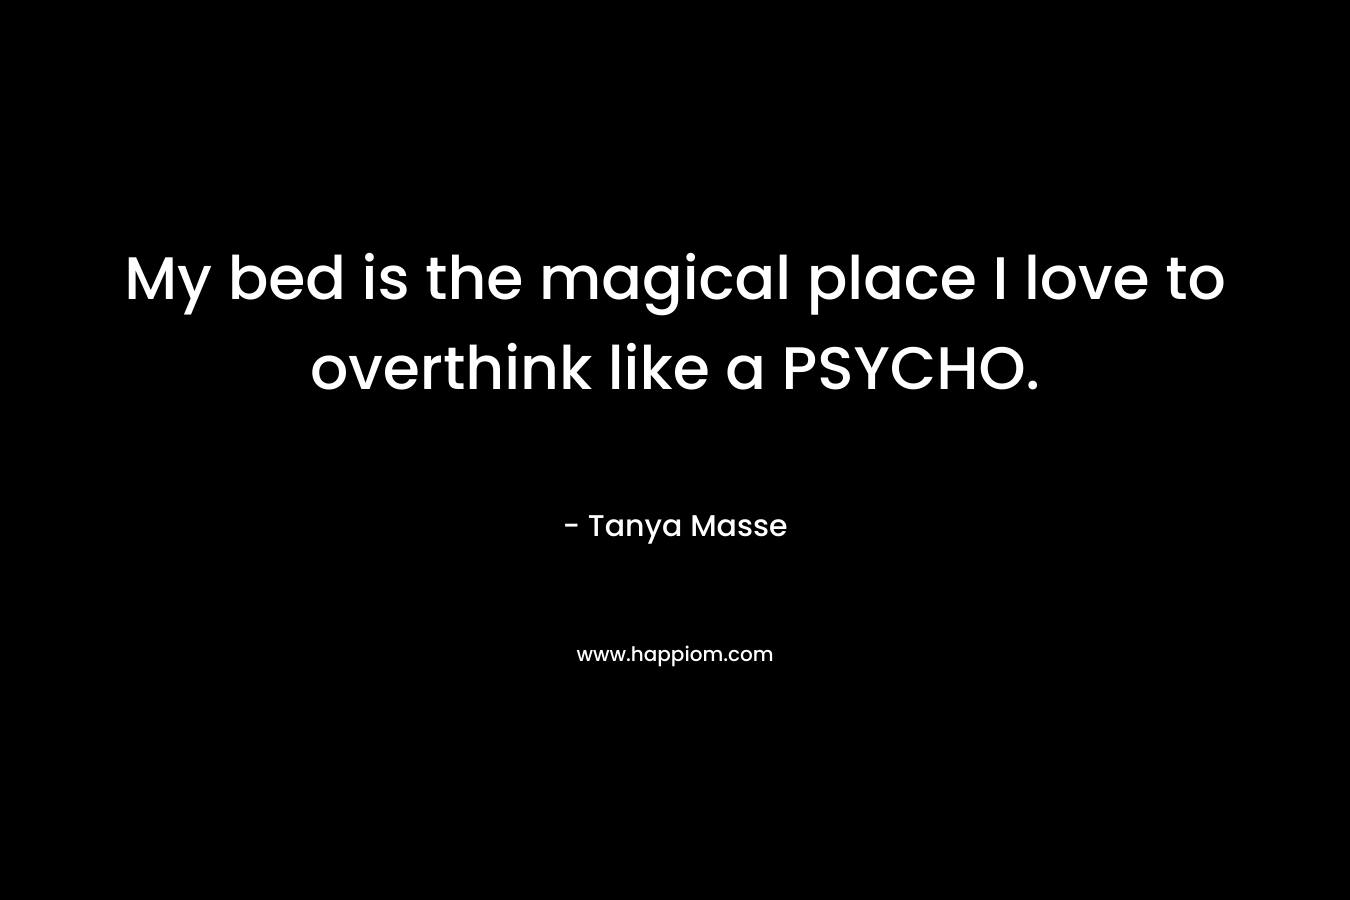 My bed is the magical place I love to overthink like a PSYCHO. – Tanya Masse